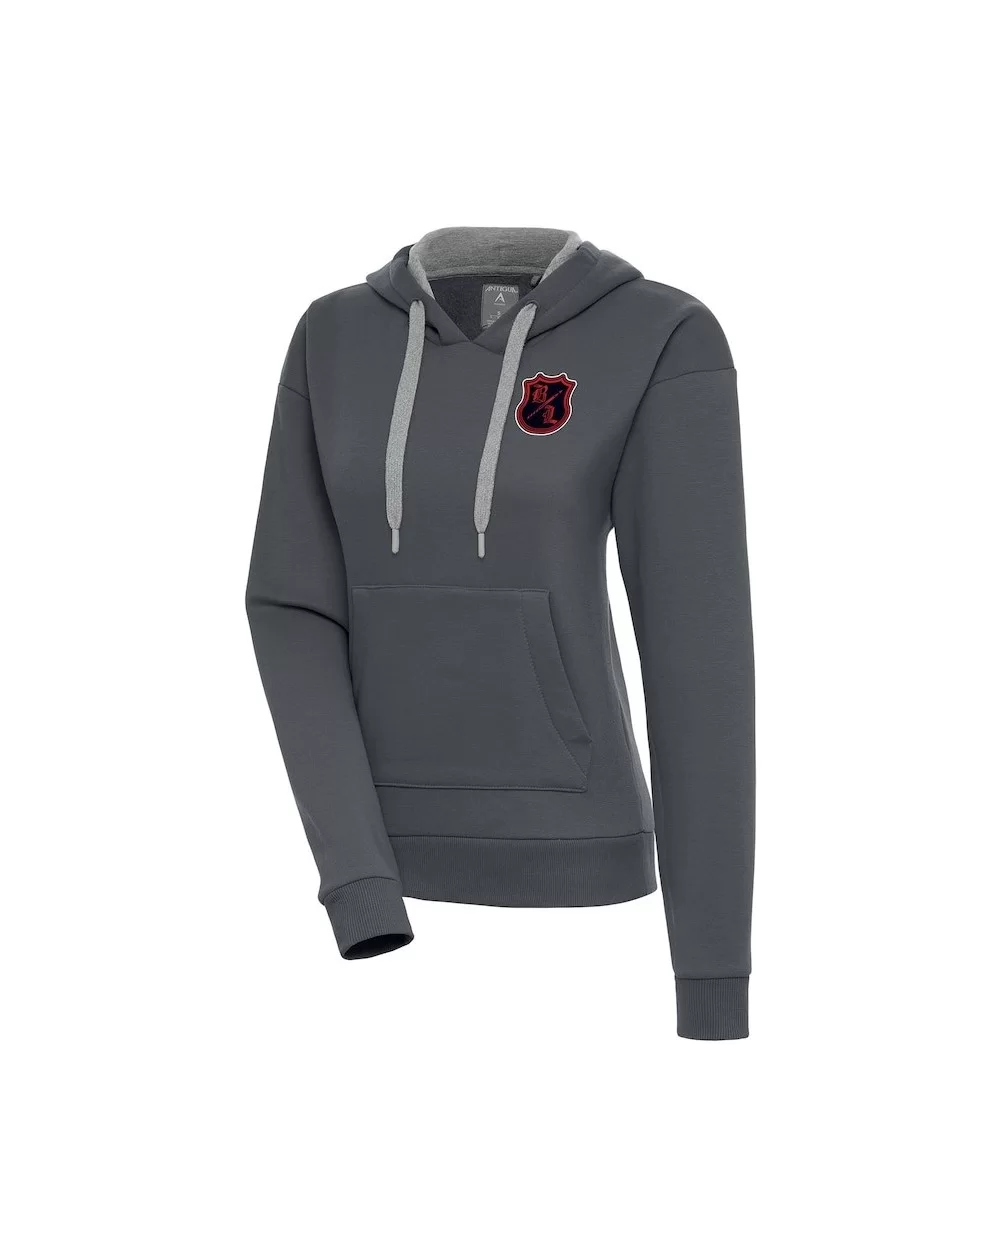 Women's Antigua Charcoal The Bloodline Victory Pullover Hoodie $18.00 Apparel